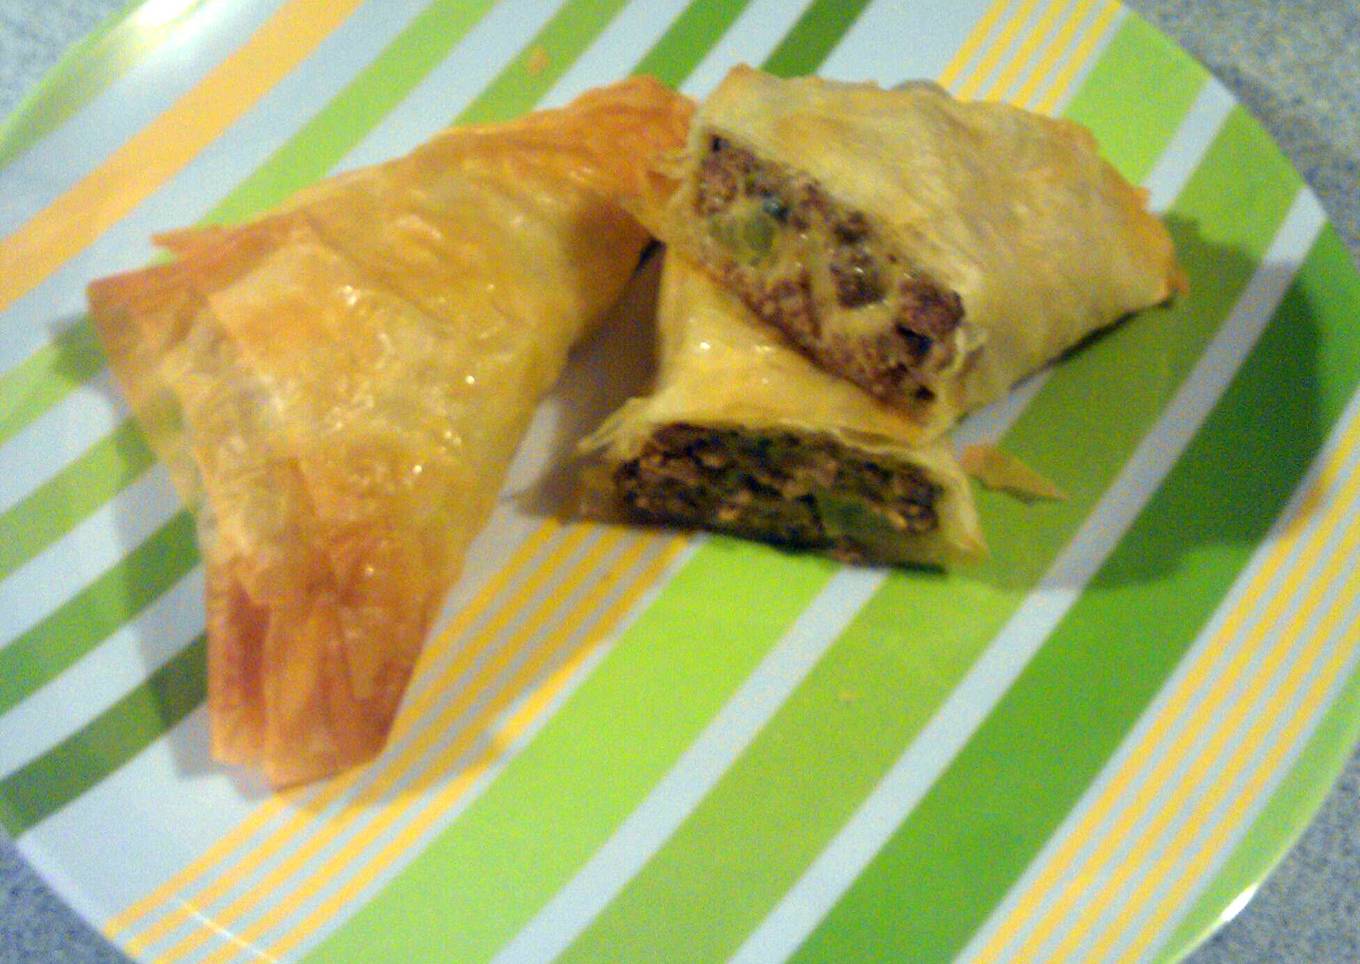 Beef and cheddar turnovers